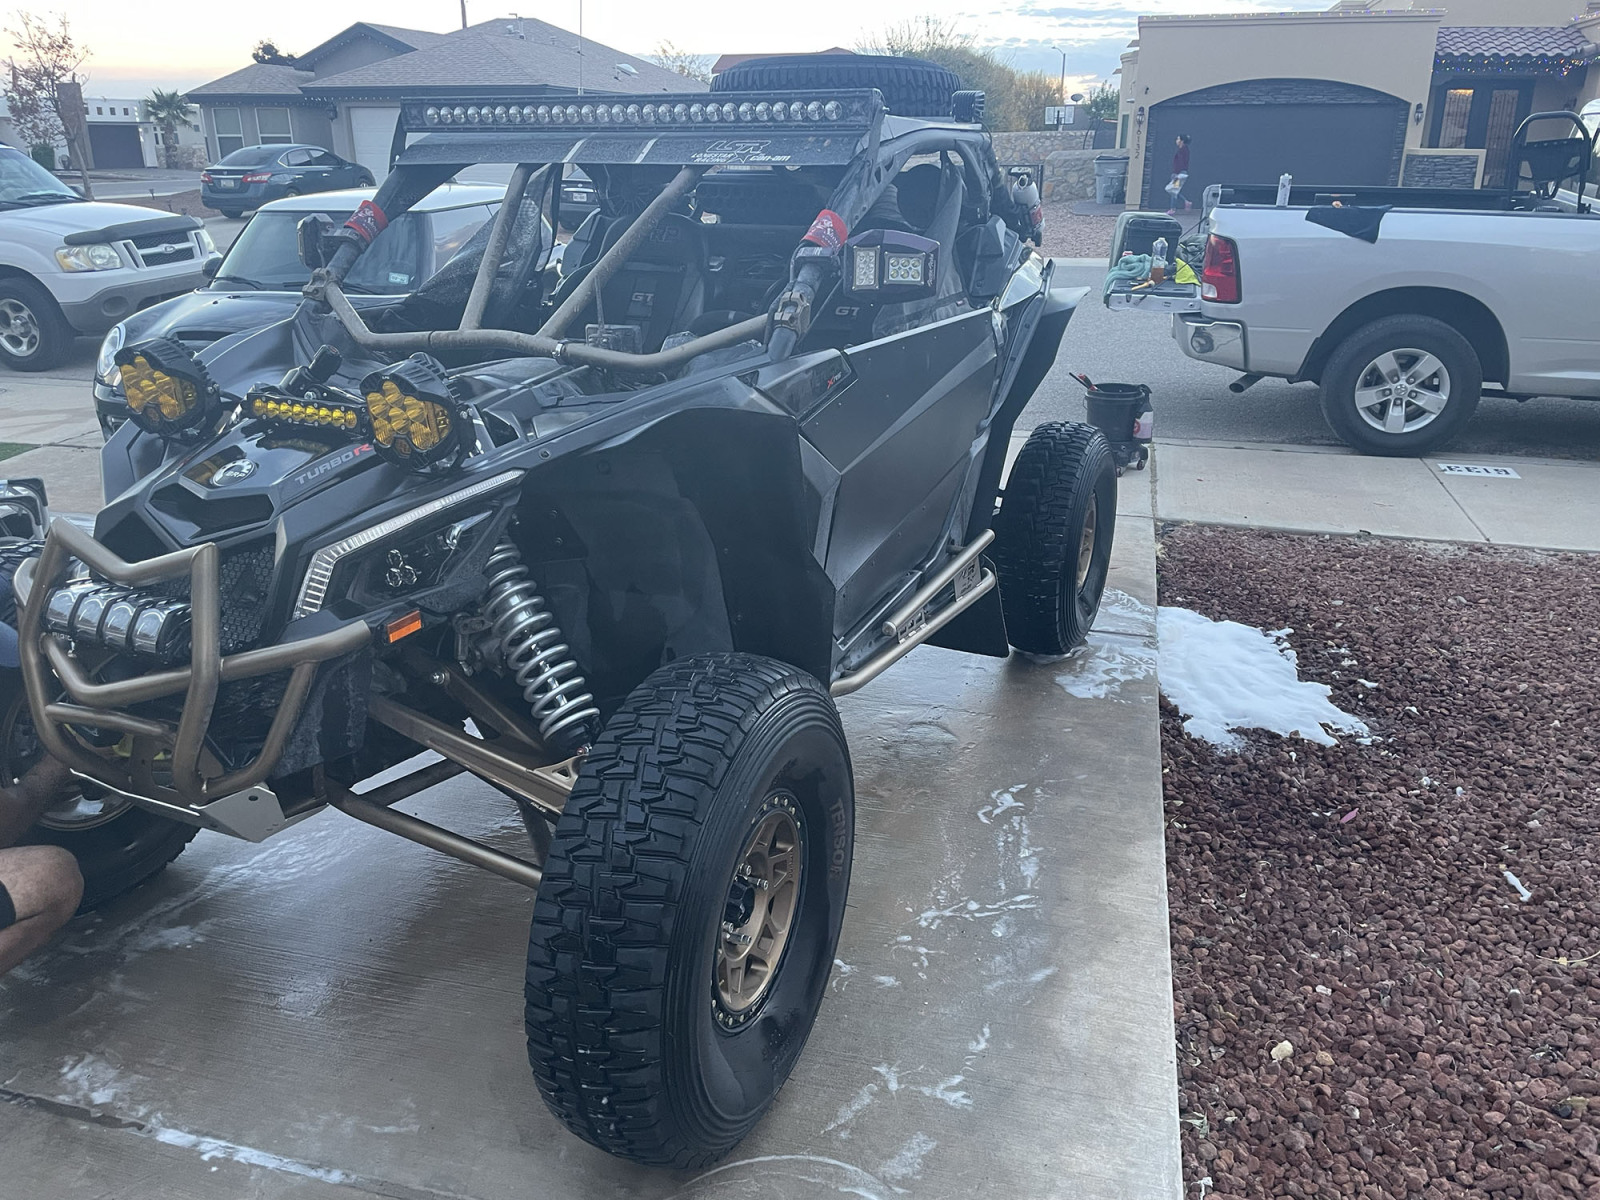 For Sale: 2019 can am maverick x3 turbo R with over 40k in upgrades - photo3